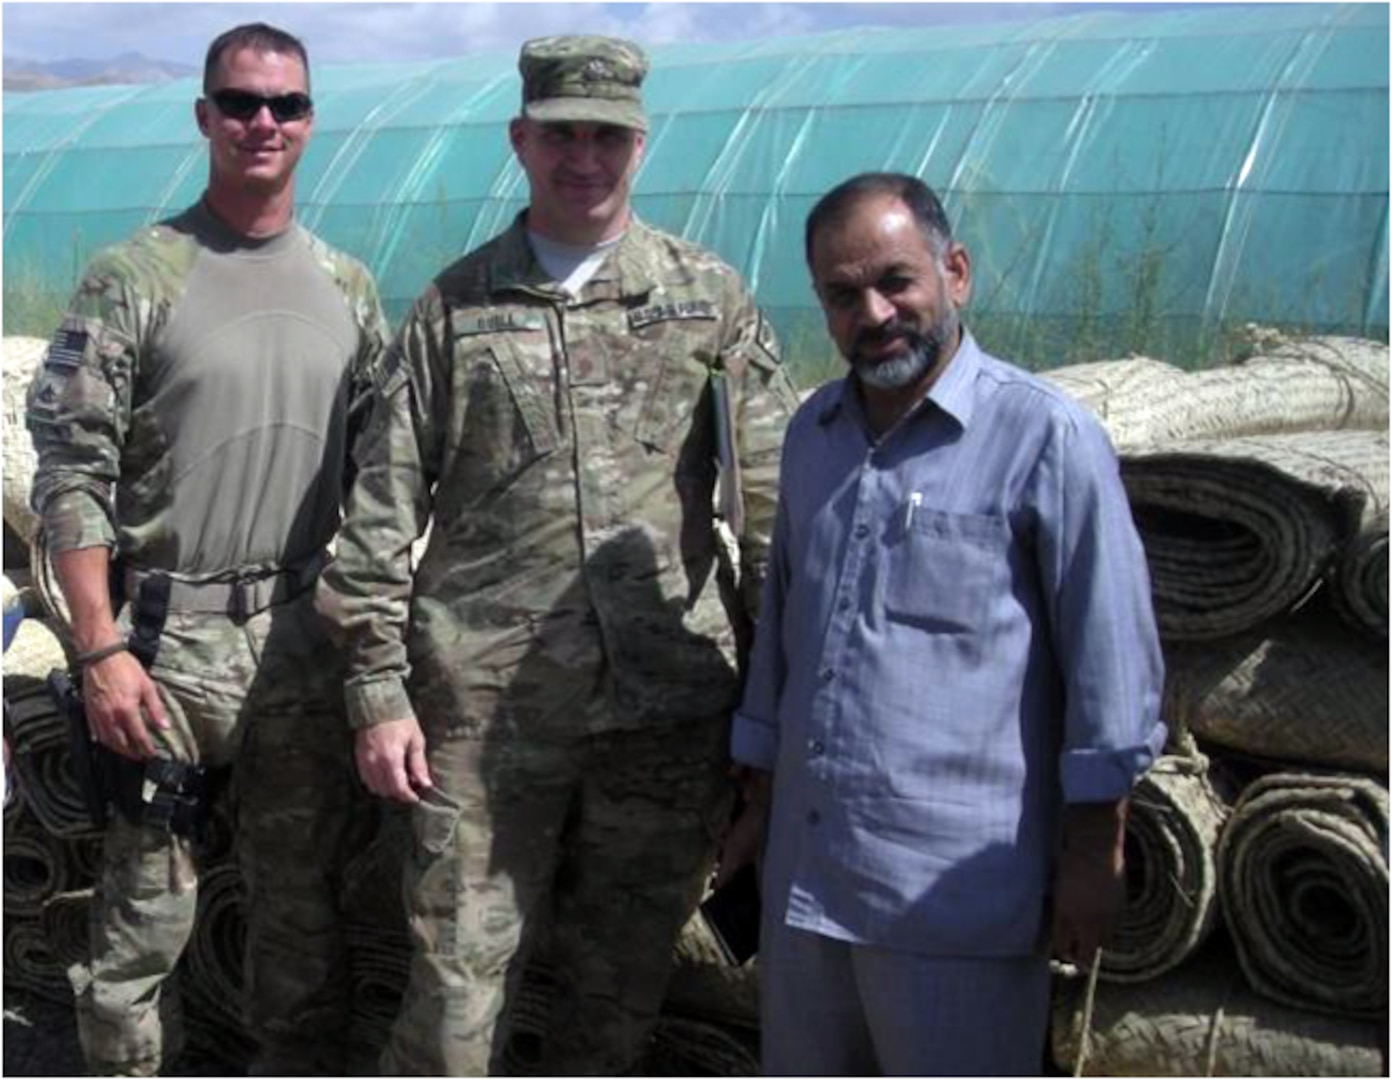 Army Staff Sgt. Jeffrey Valentine, Army Maj. Bernie Quill and members of the Kentucky Agribusiness Development Team 3 work with one of the local Afghan businessmen, Abdul Farzam, on developing their agricultural businesses during their deployment to Afghanistan.